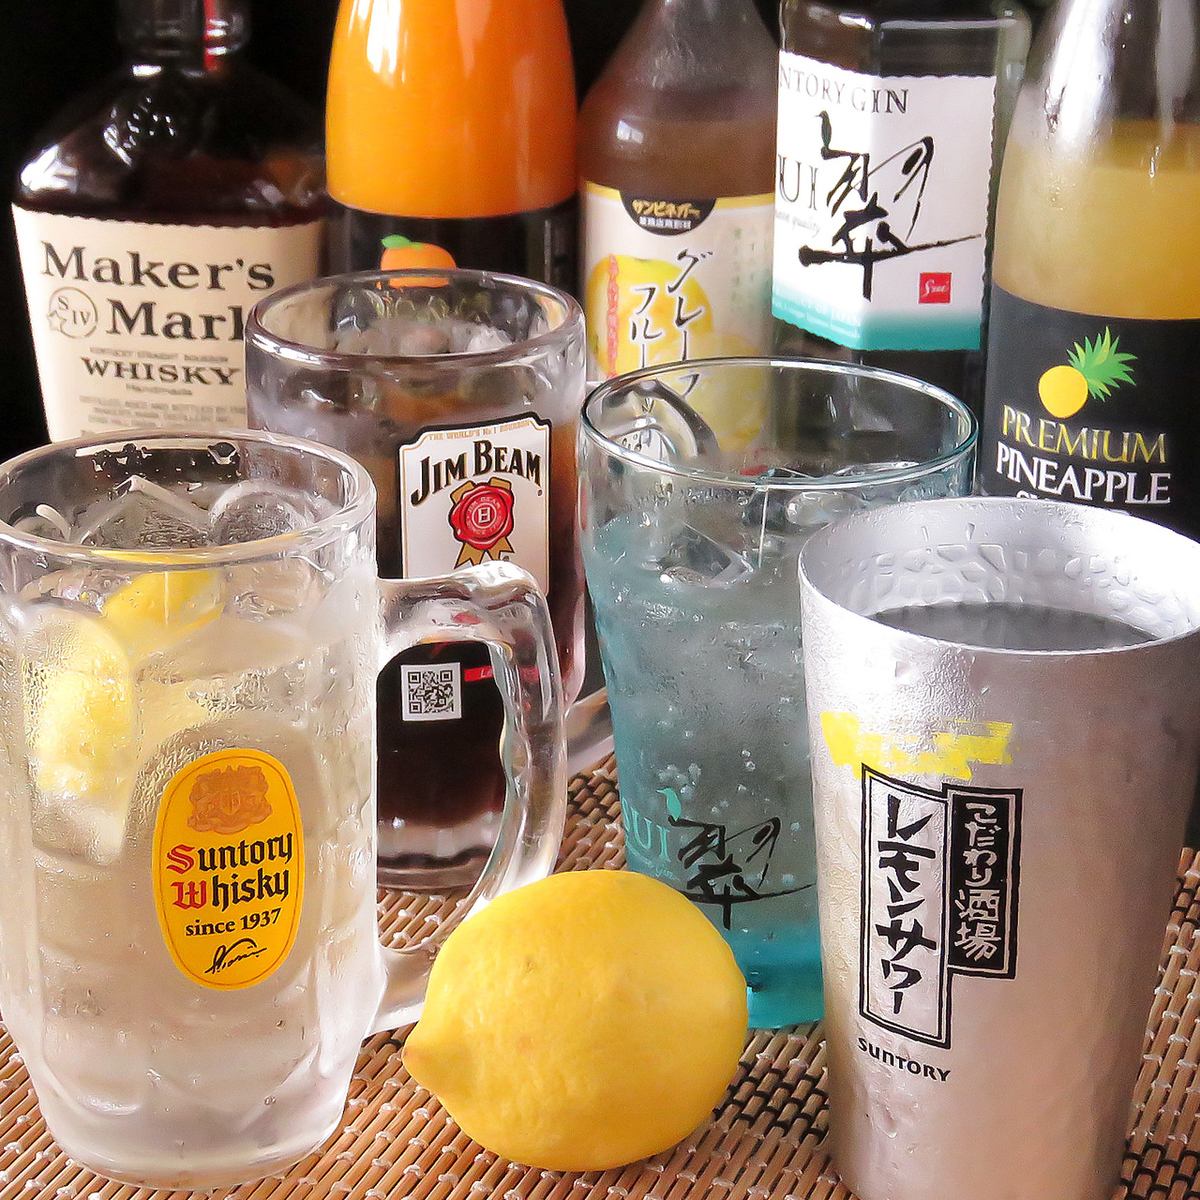 We offer all-you-can-drink for 1 hour for 1250 yen (tax included)! Extension possible